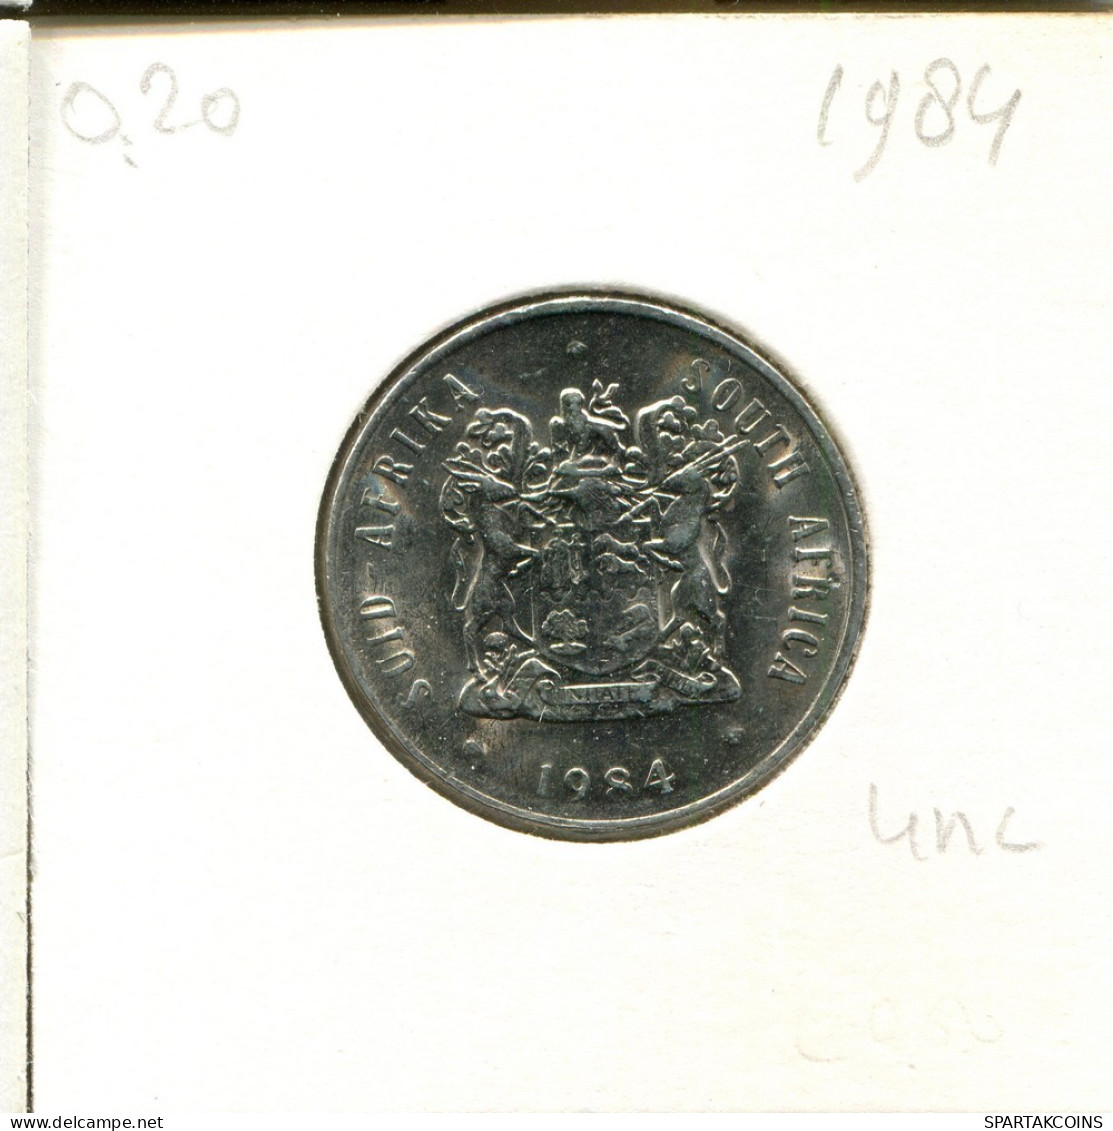 20 CENTS 1984 SÜDAFRIKA SOUTH AFRICA Münze #AT110.D.A - South Africa